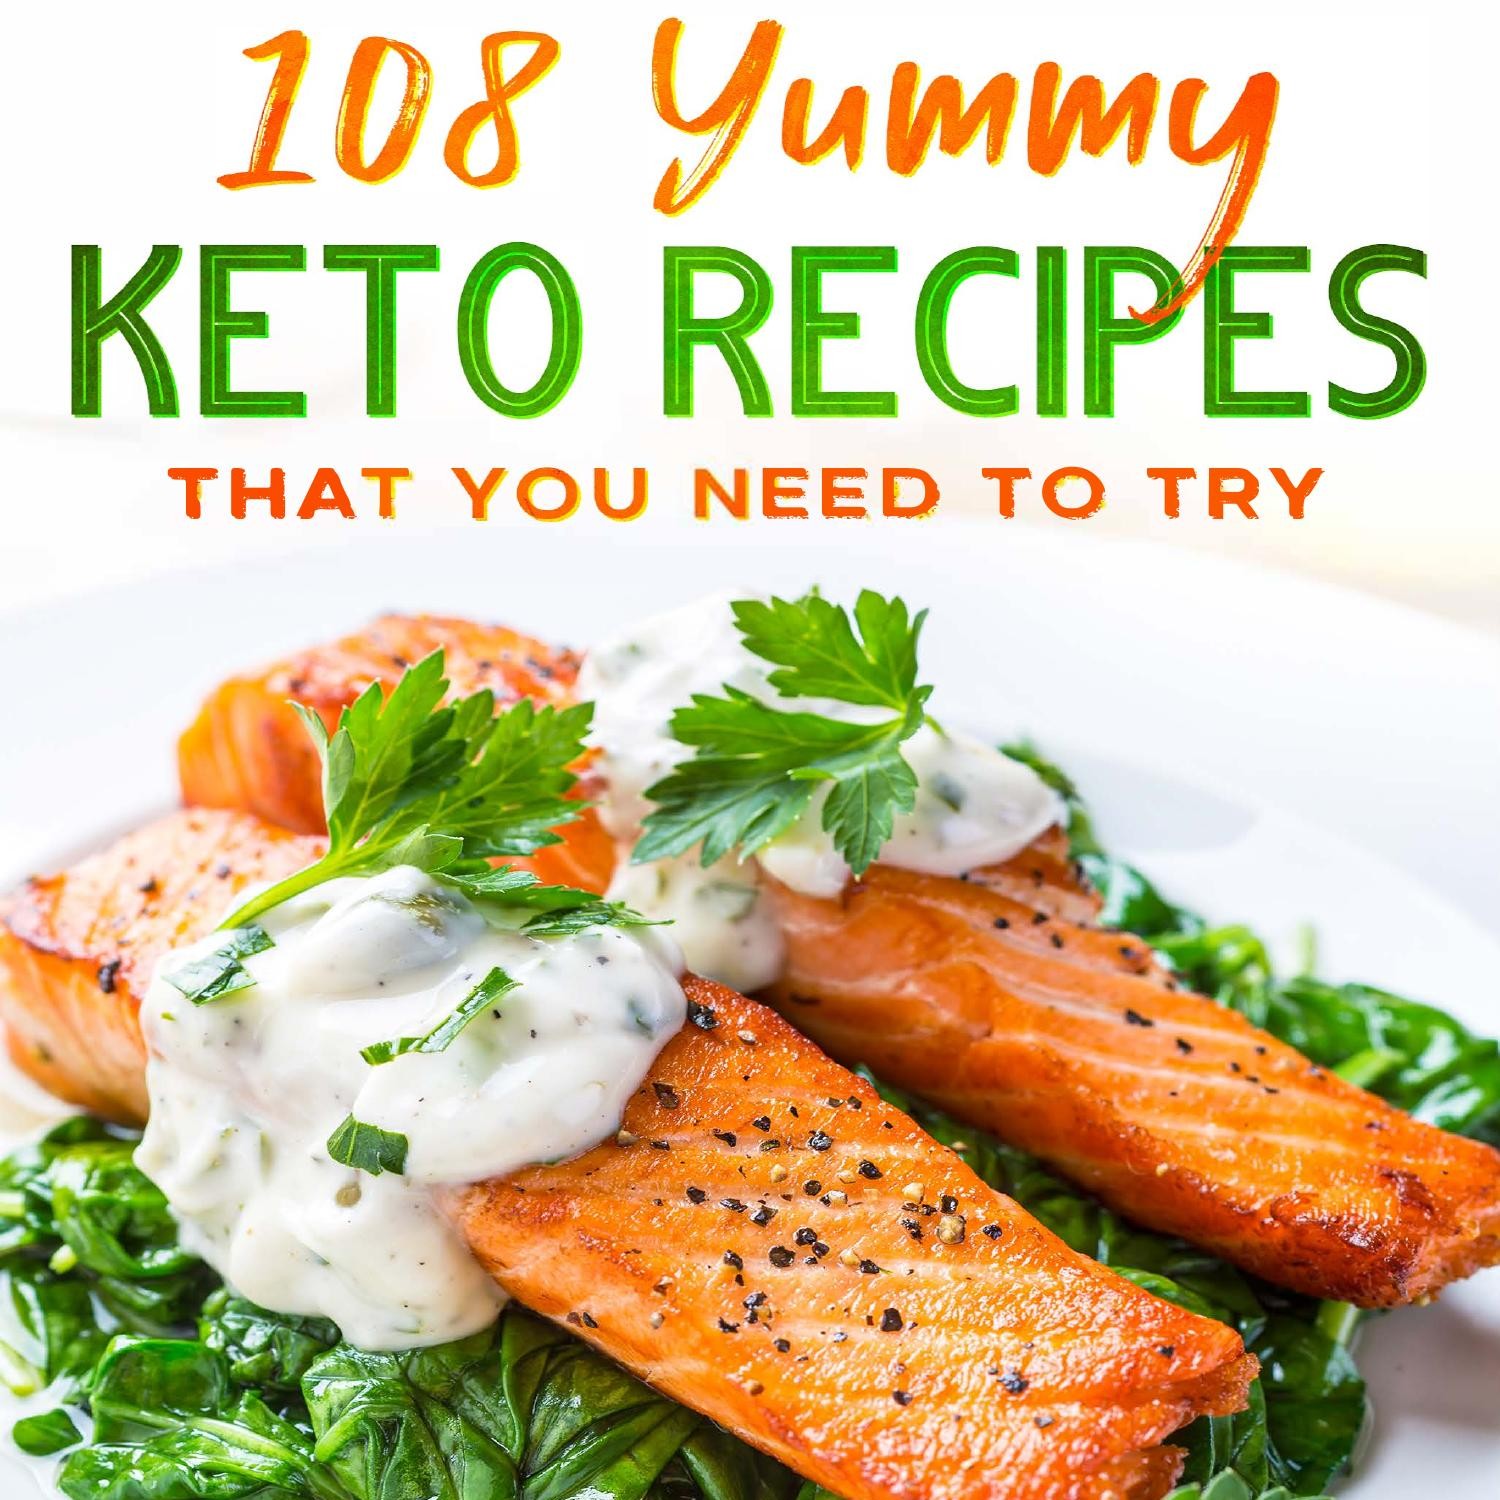 108 Yummy Keto Recipes That You Need To Try.pdf | DocDroid